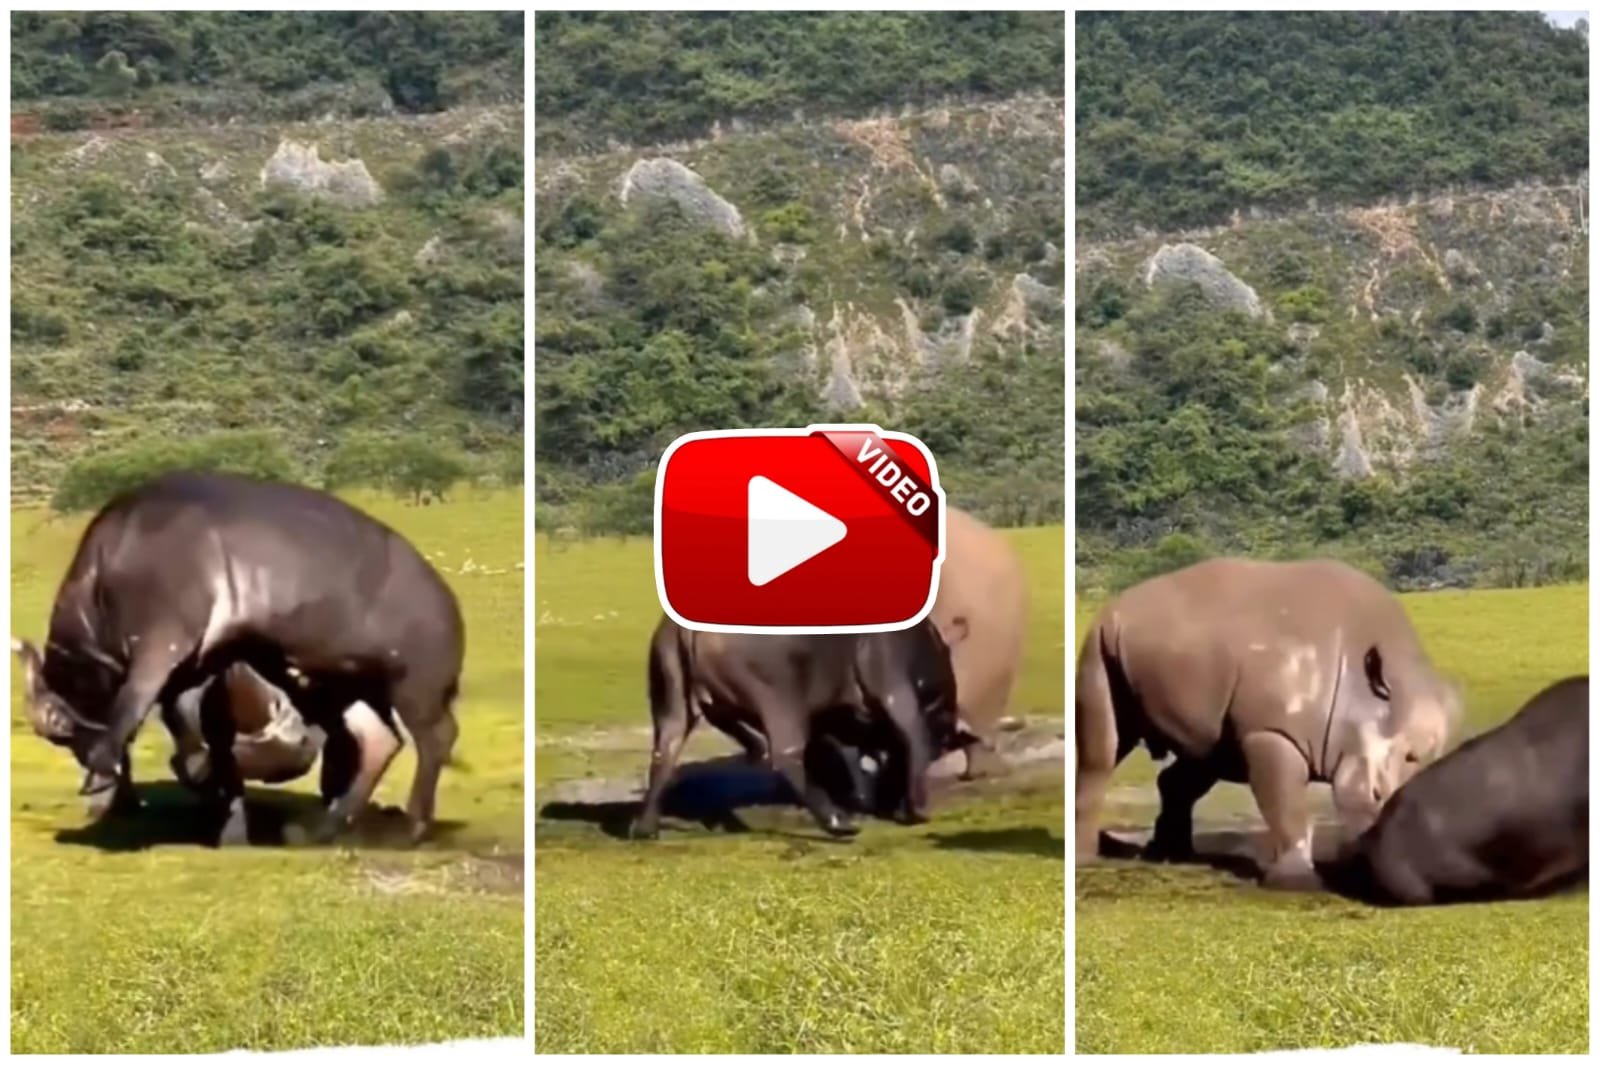 Buffalo and Rhino Video | When the rhinoceros got angry, he jumped and beat the buffalo.